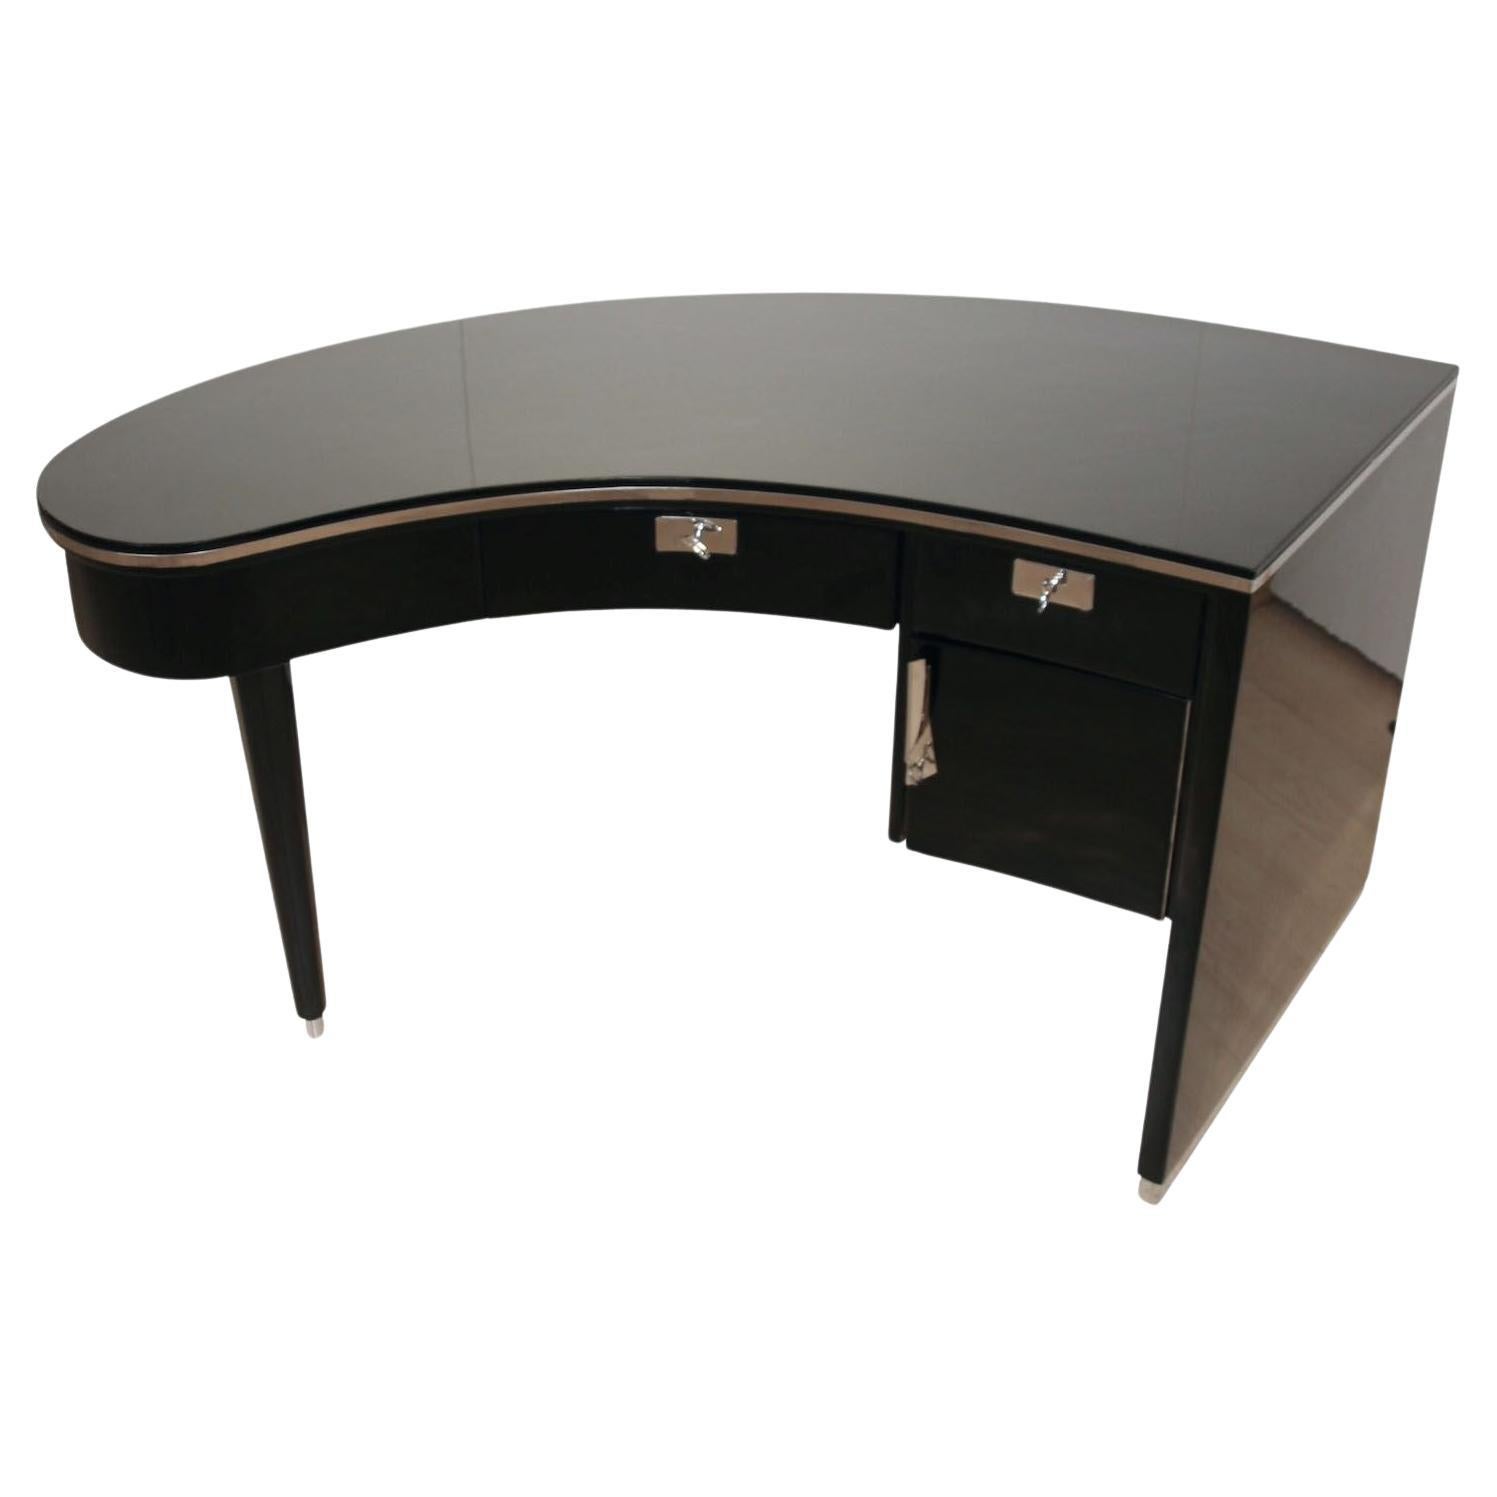 Extraordinary curved (kidney-shaped) designer desk from the 1950/60s.

Asymmetrical shape similar to that of a grand piano. Walnut, high-gloss black finish with piano lacquer. Octagonal tapered feet with metal tips. Circumferential metal trim around